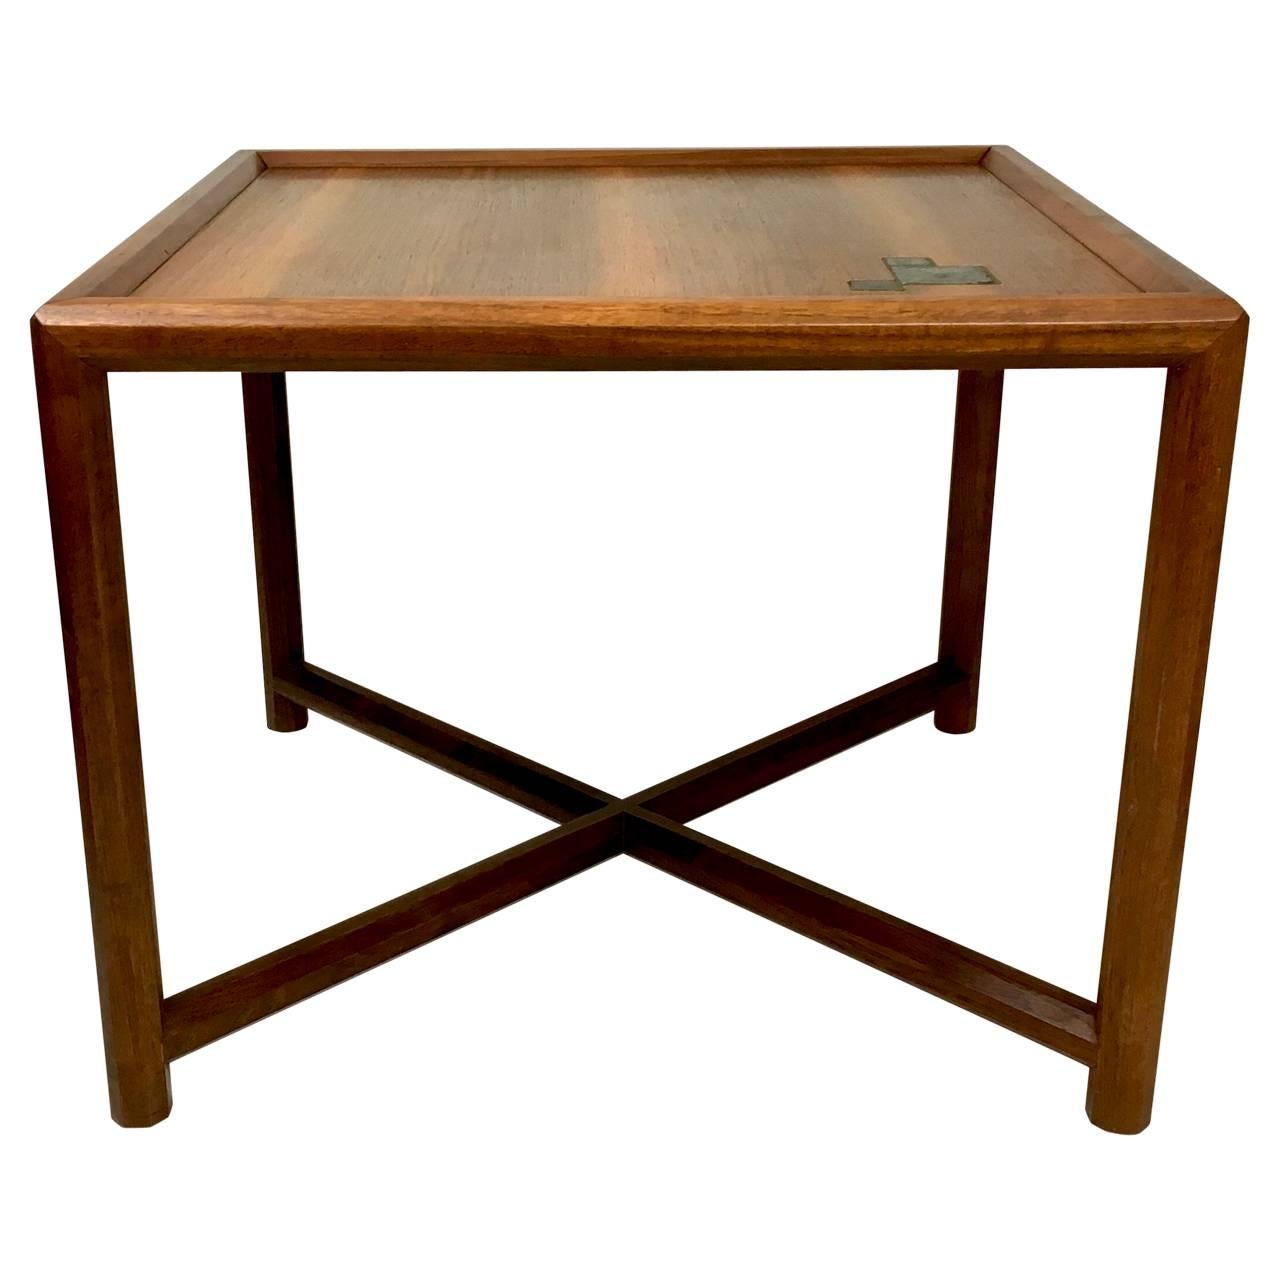 American Edward Wormley Occasional Table With Tiffany Tiles, Made For Dunbar 